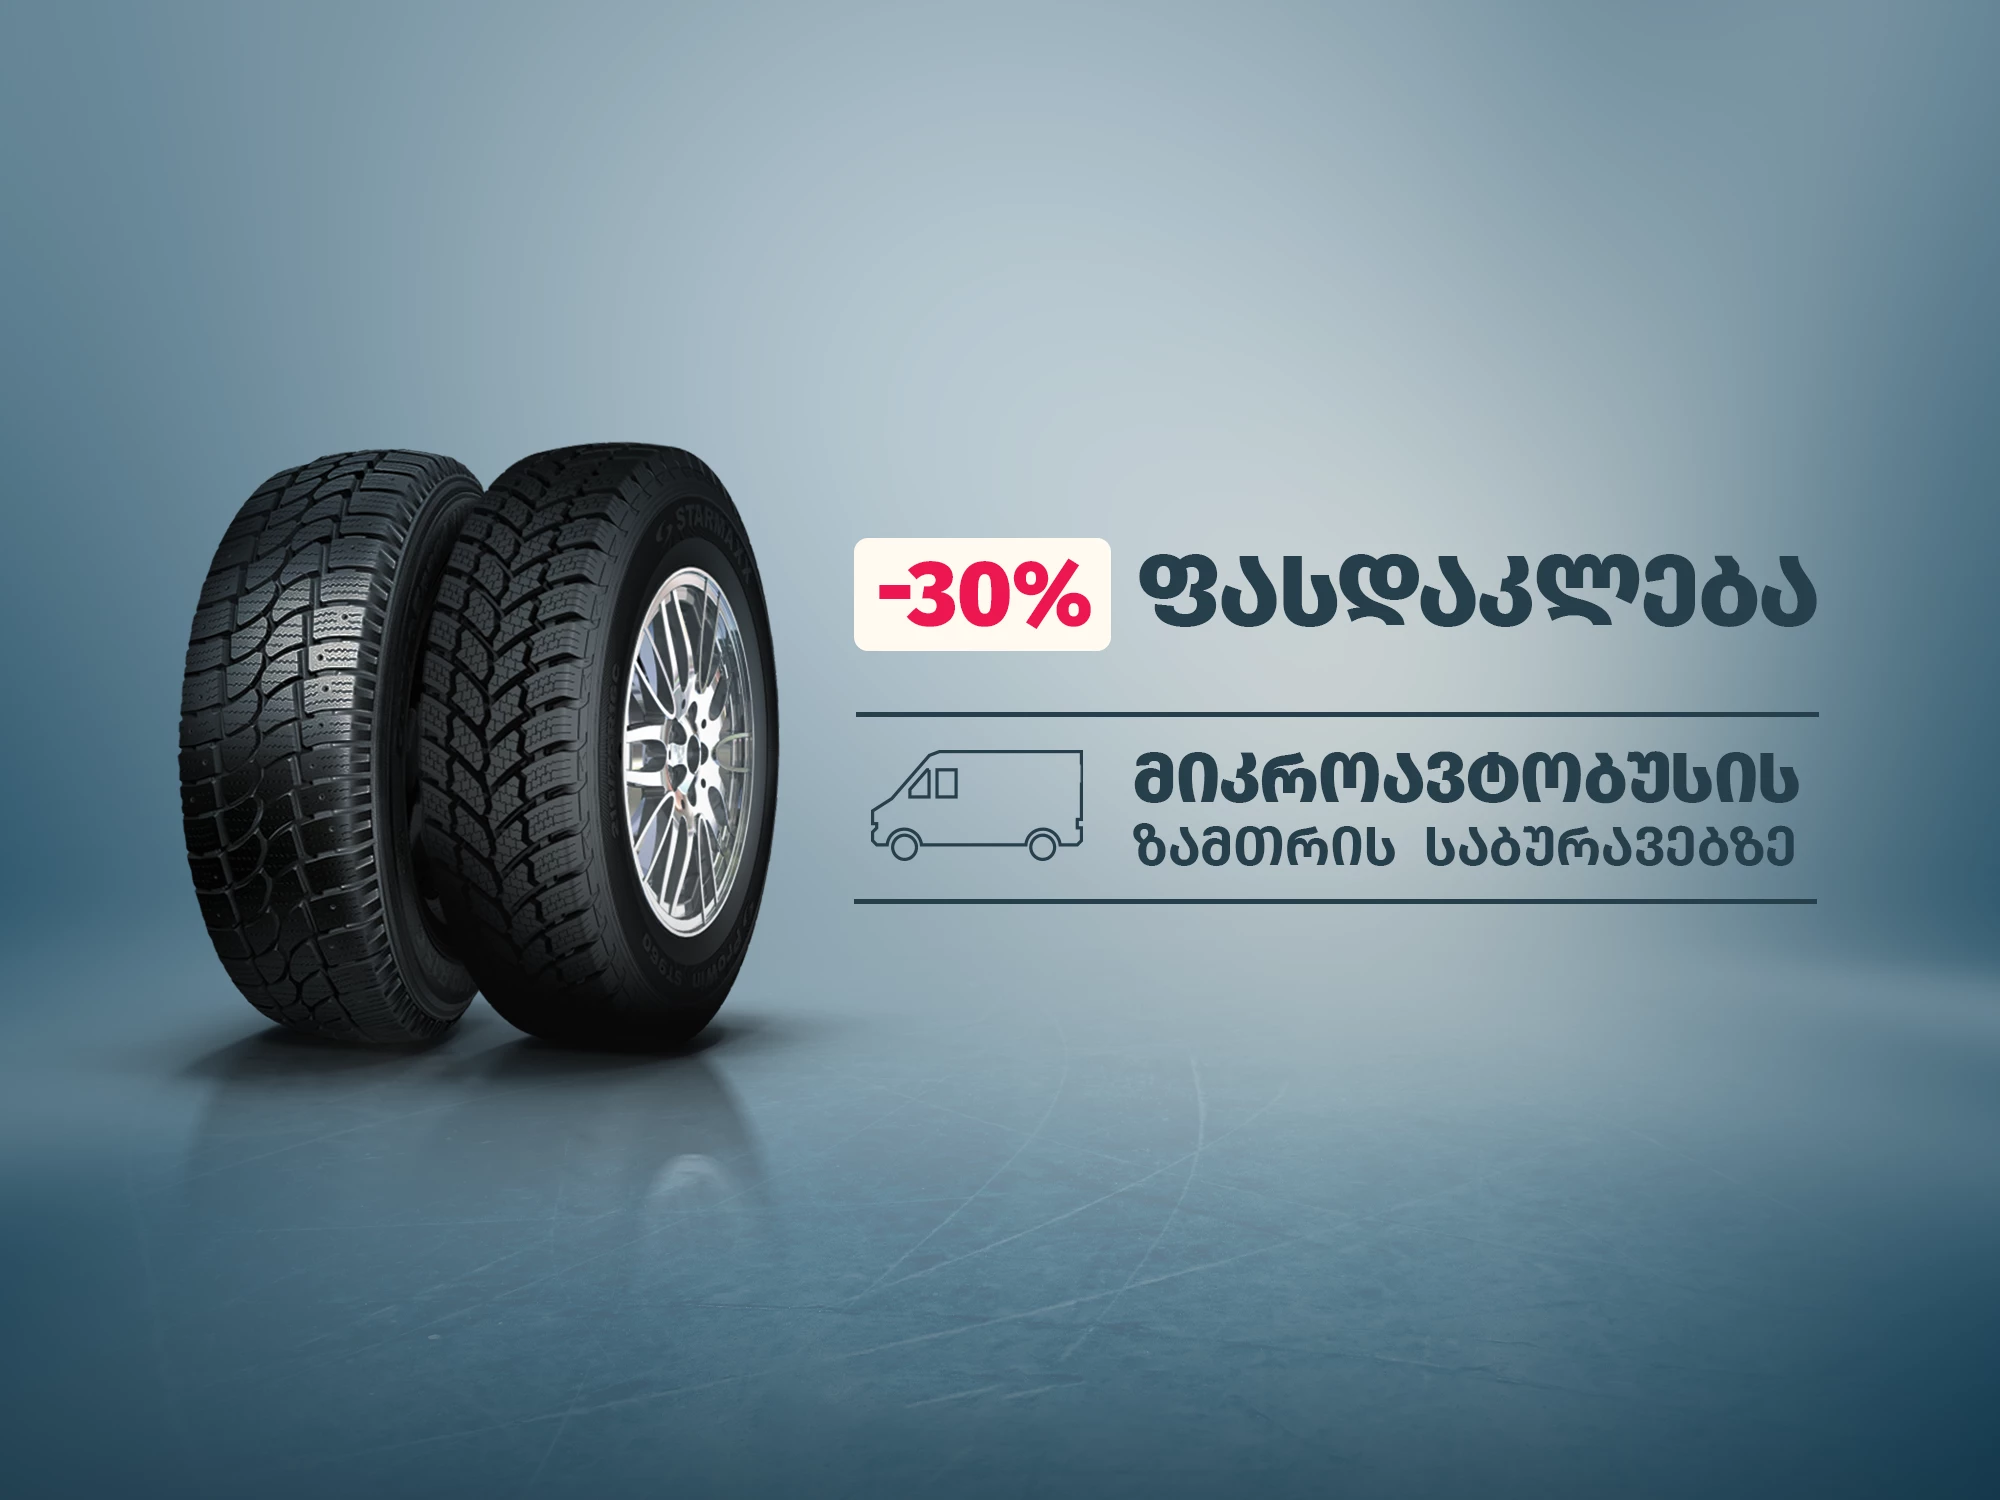 30% DISCOUNT ON MINIBUS WINTER TIRES! Offer Image